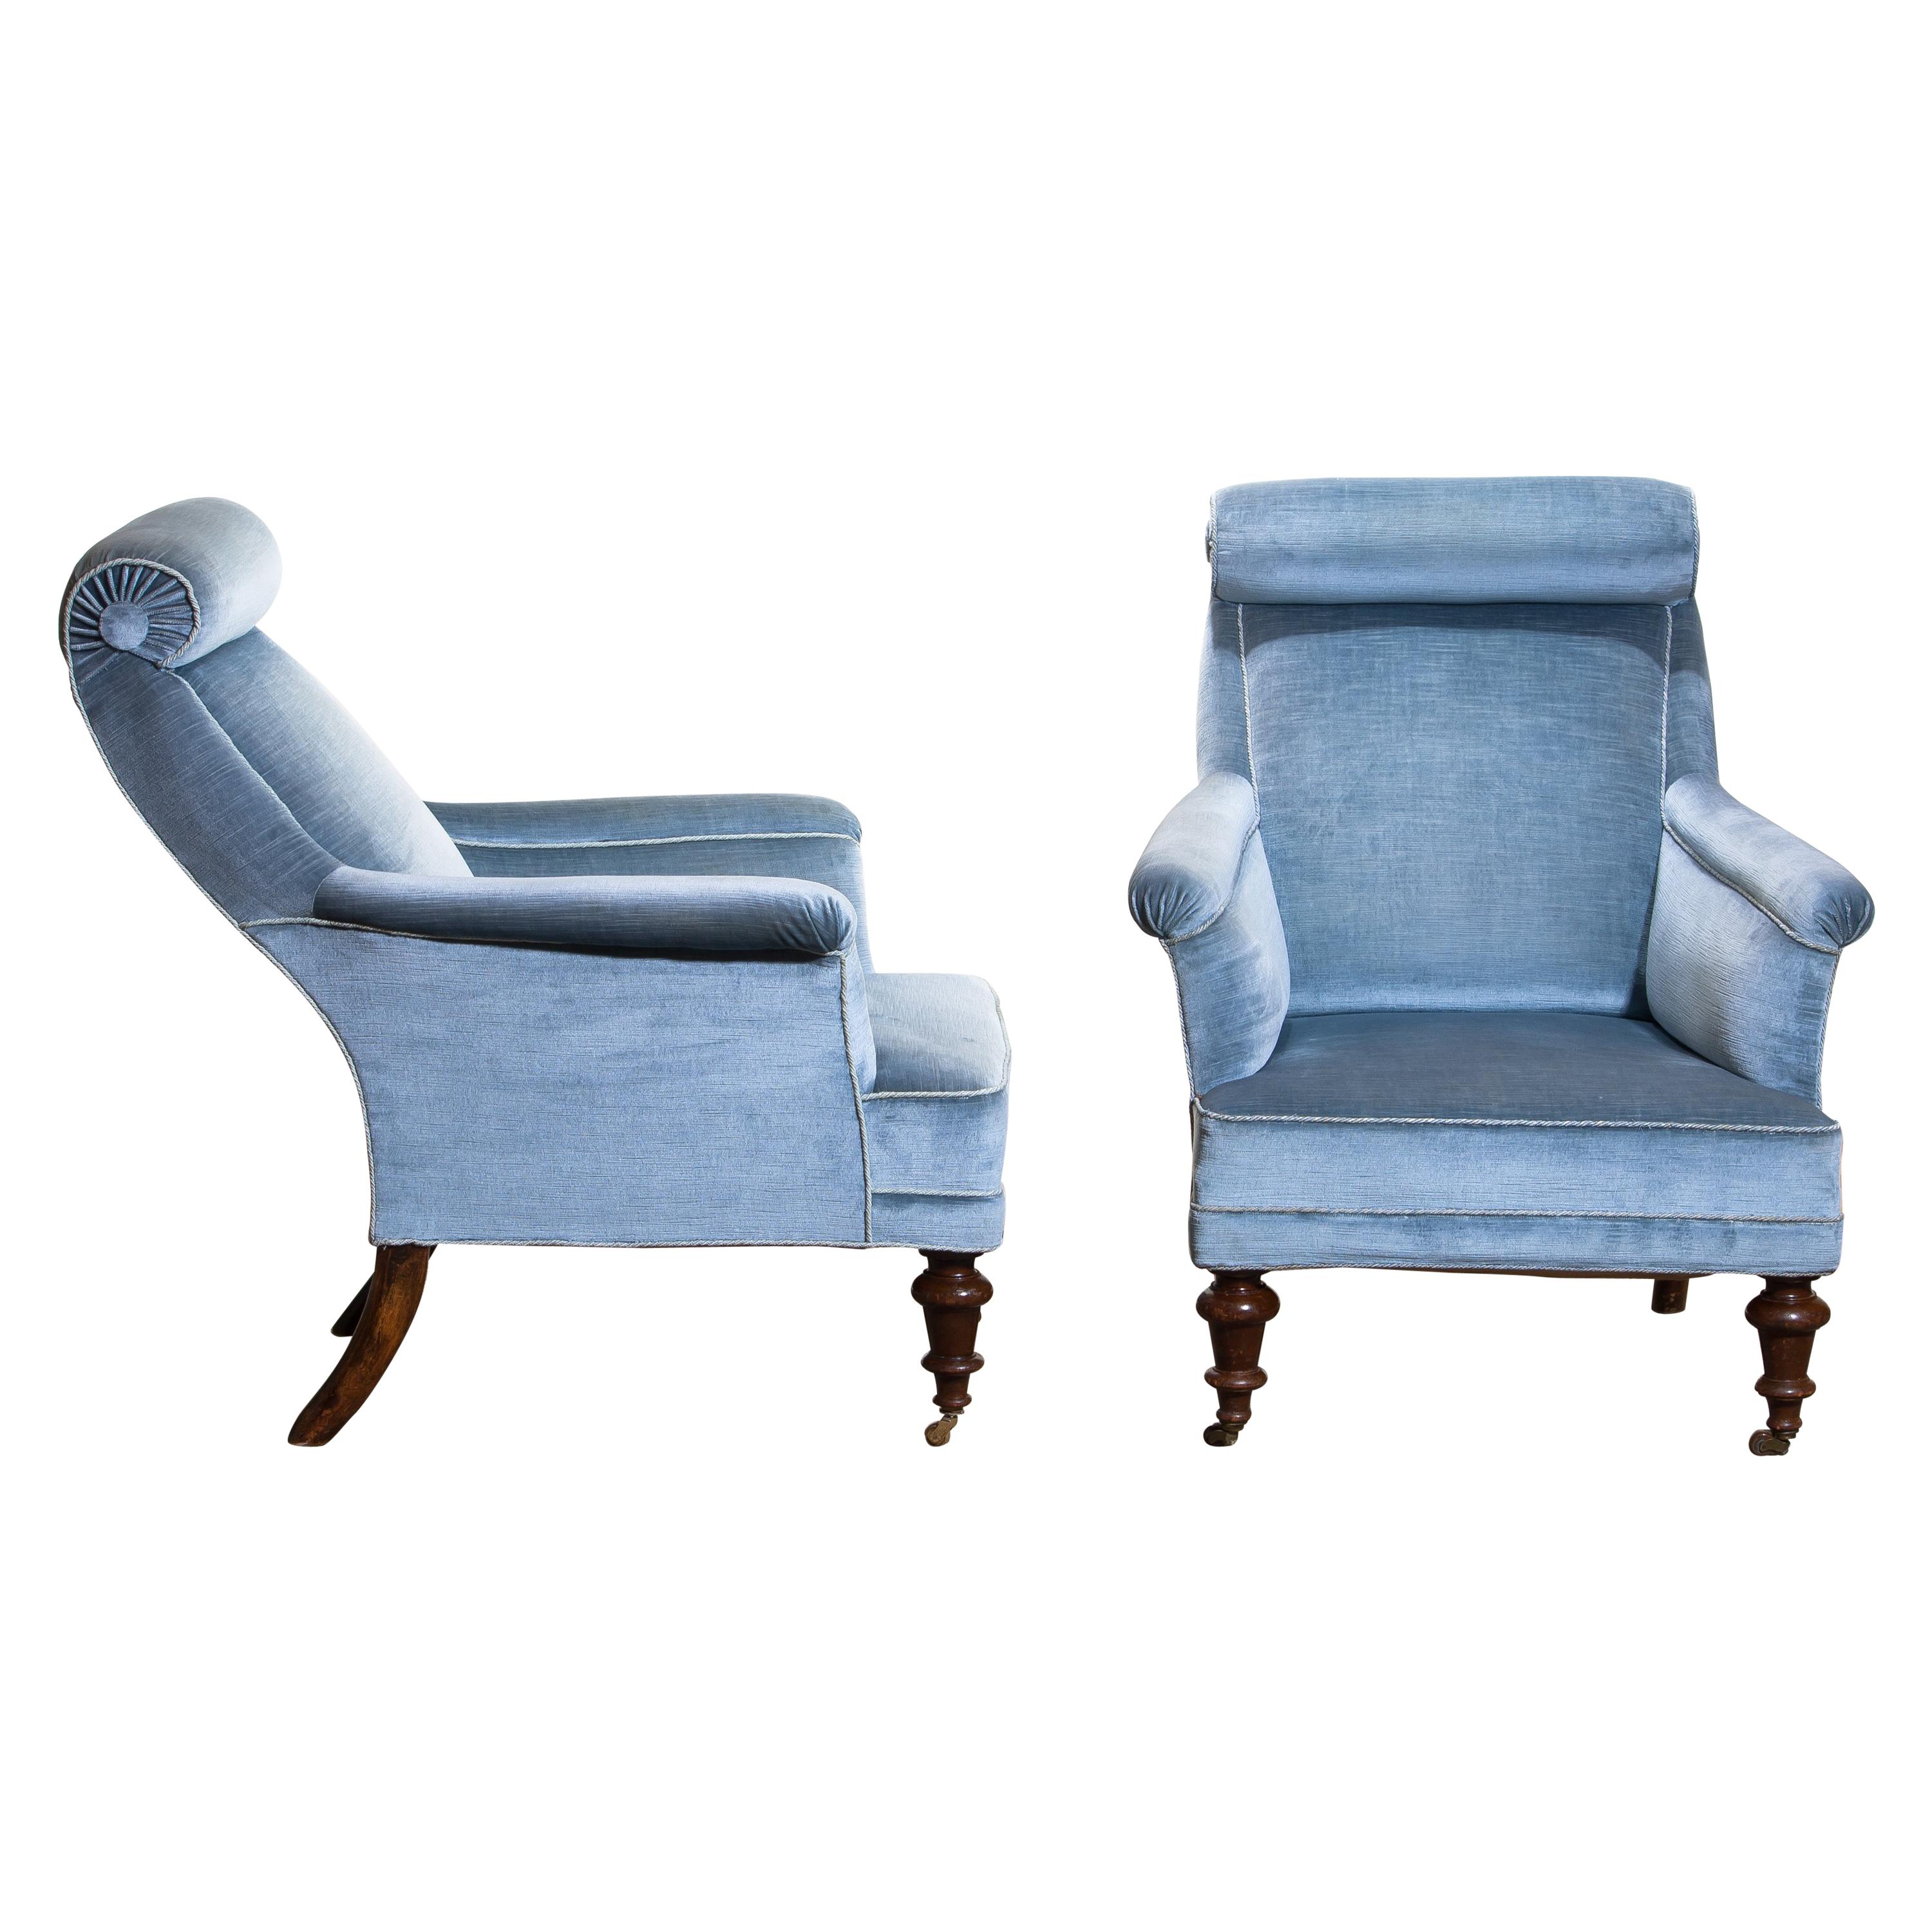 American Classical 1900s Set of Two Ice Blue Velvet Dorothy Draper Style Bergère / Lounge Chairs